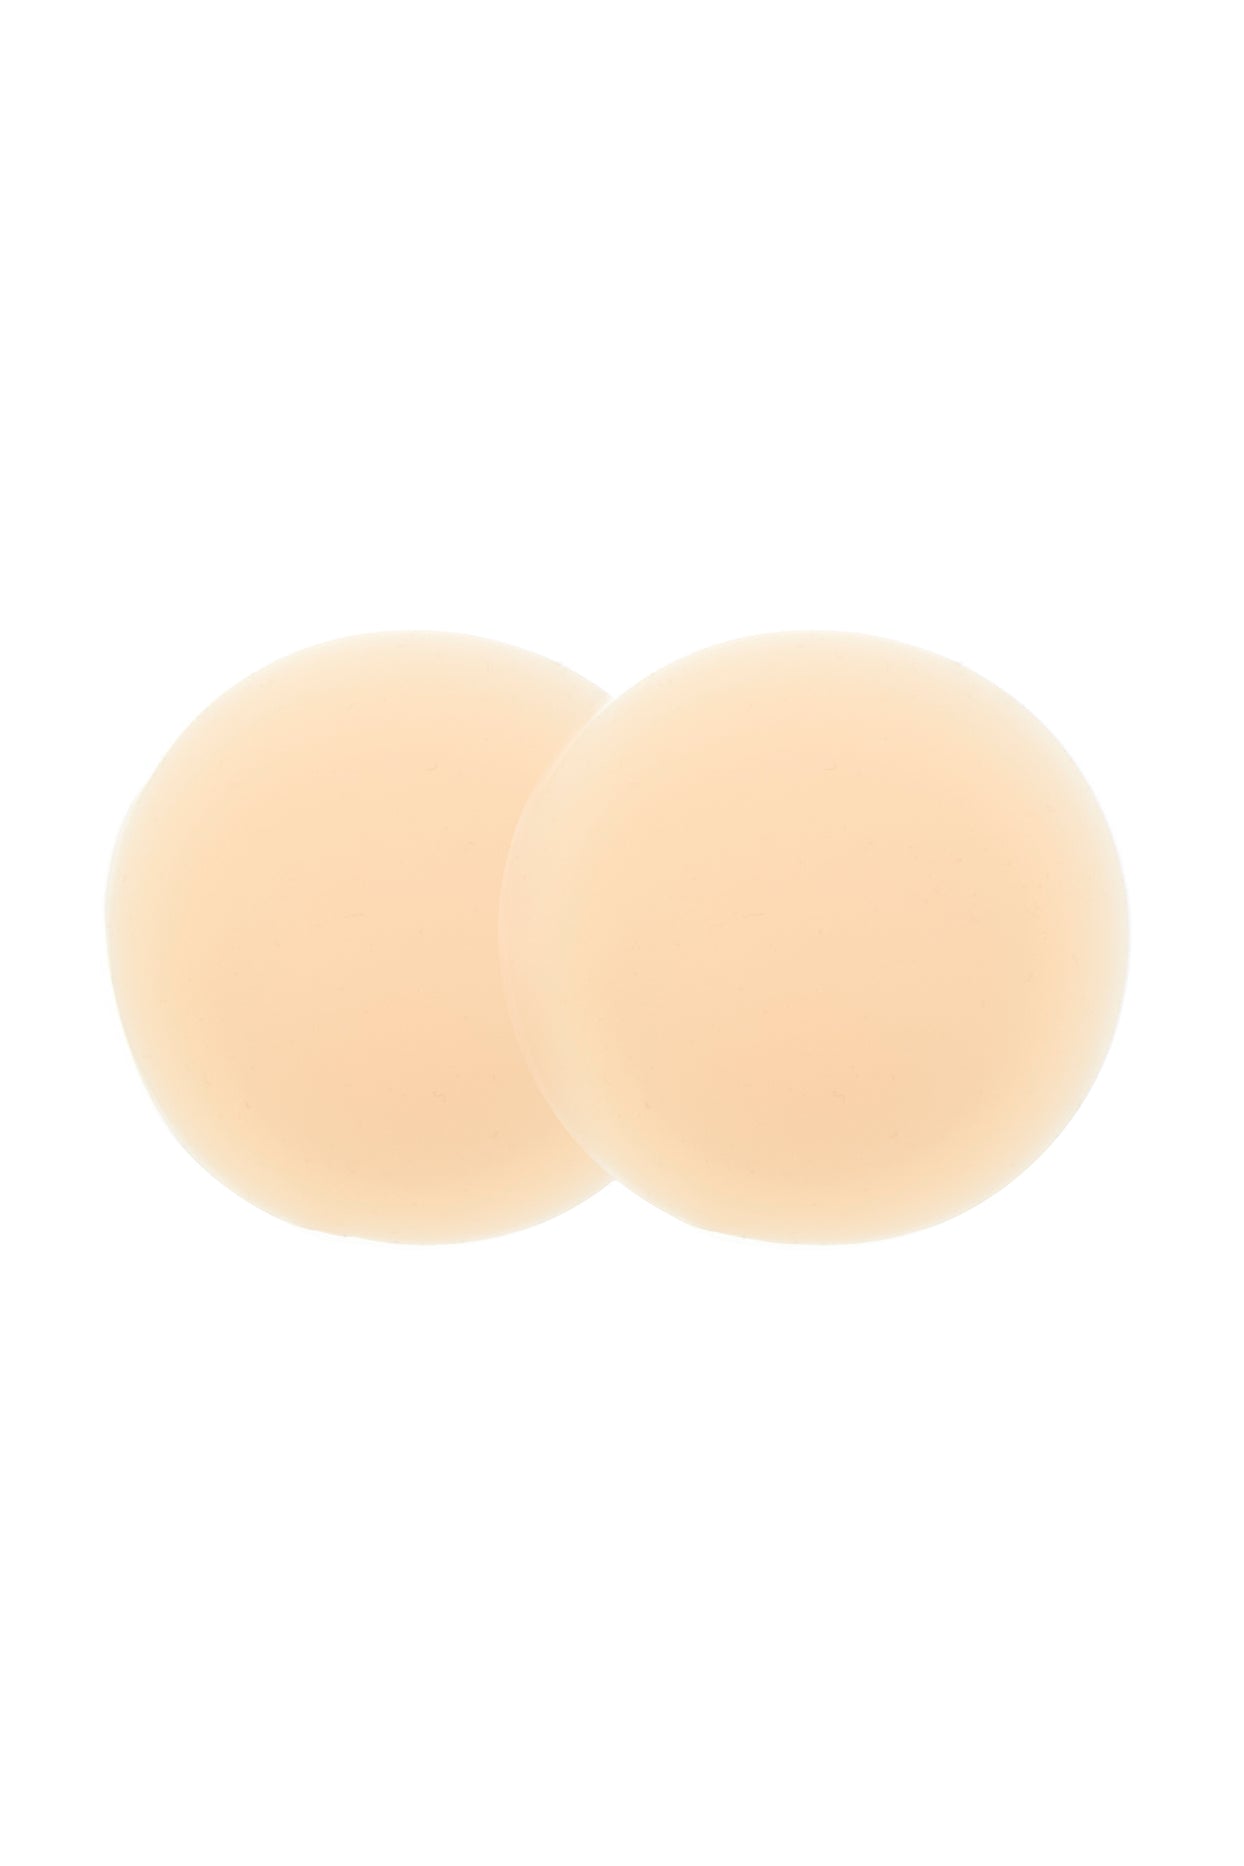 Reusable Silicone Nipple Covers in Beige